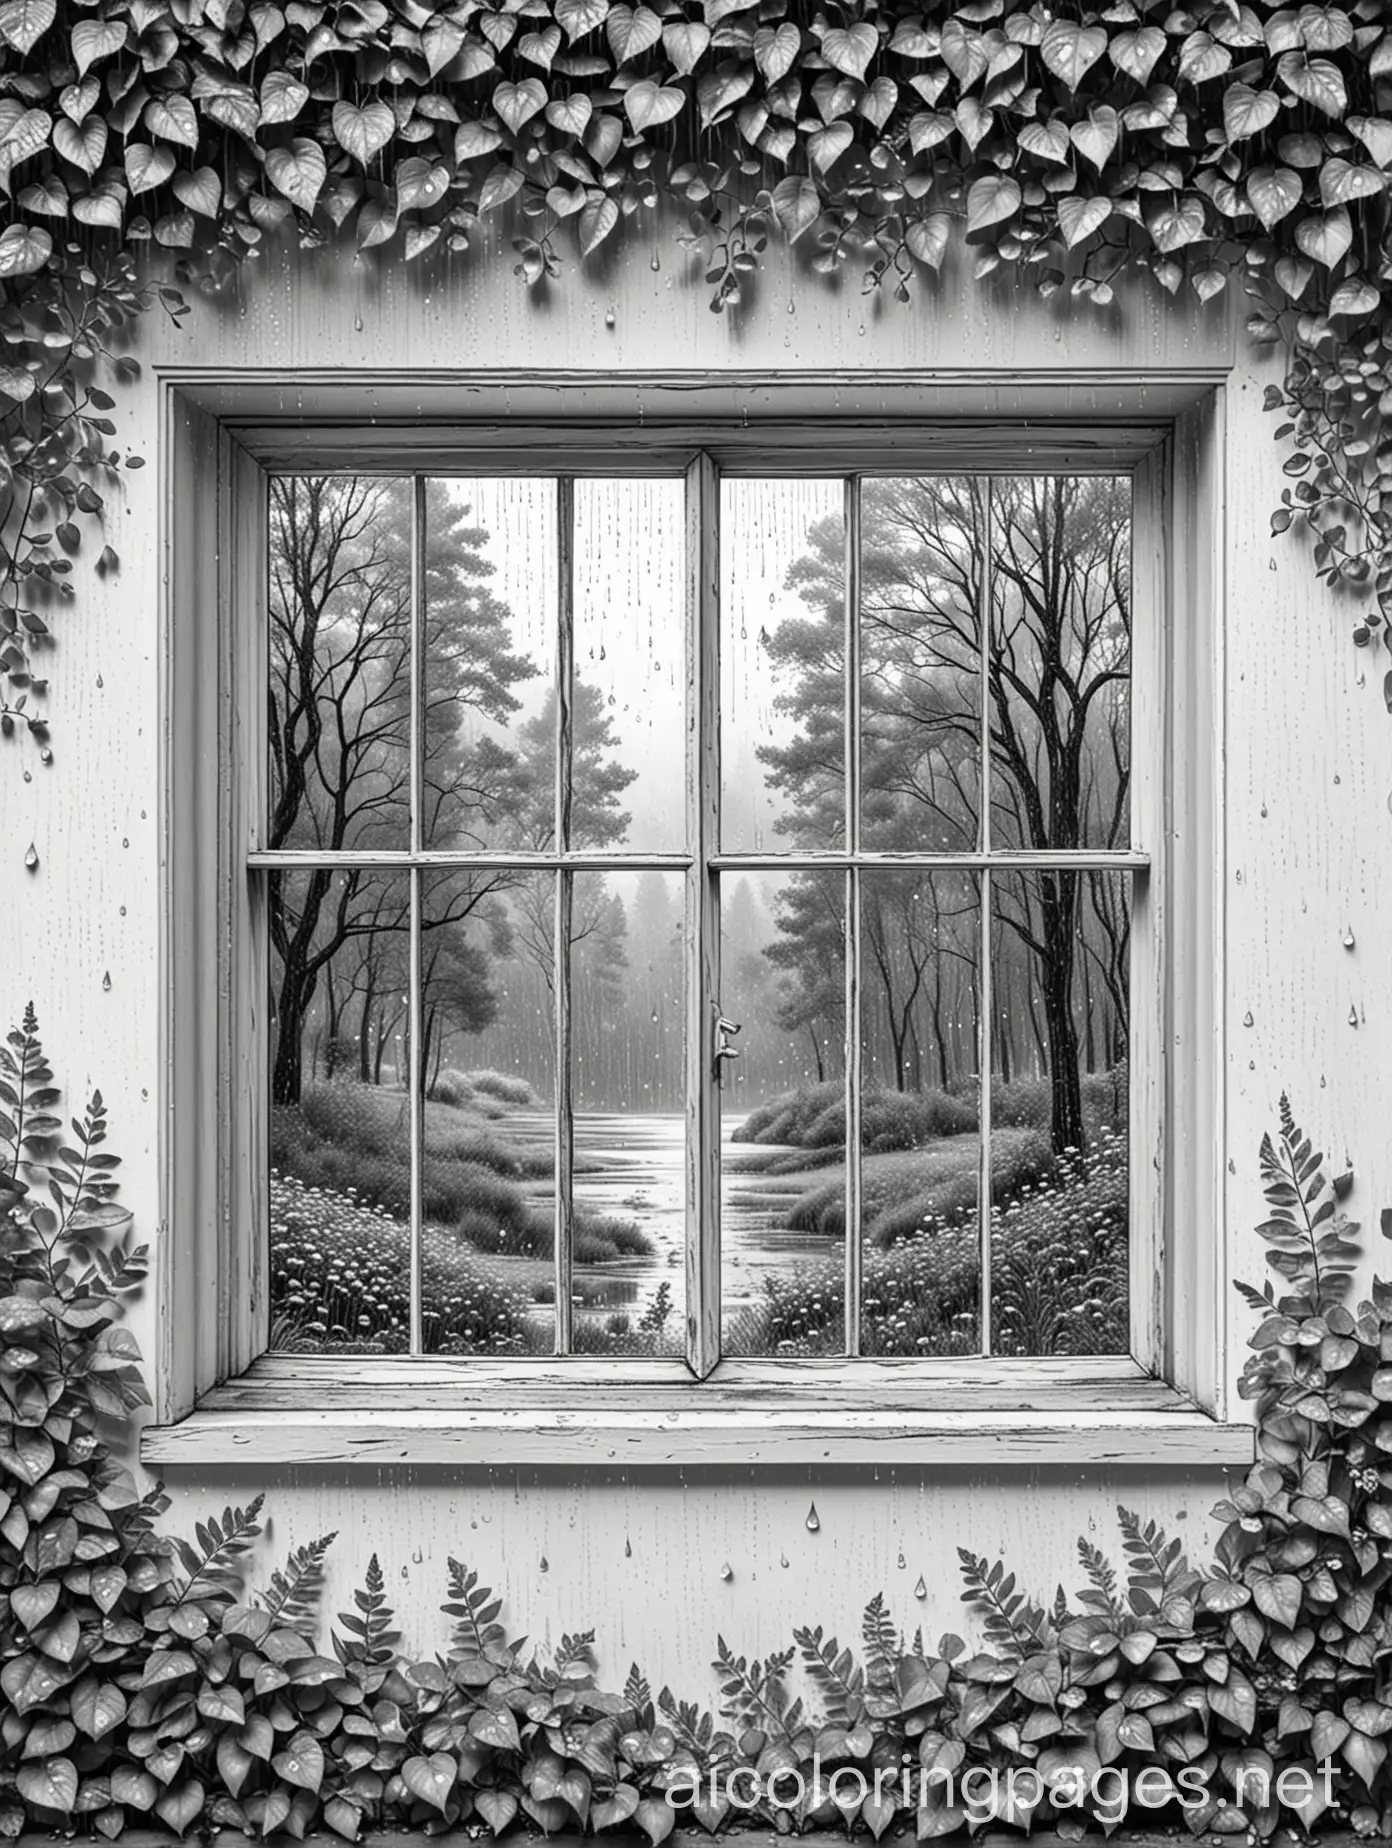 cottage window covered in raindrops facing a forest , Coloring Page, black and white, line art, white background, Simplicity, Ample White Space. The background of the coloring page is plain white to make it easy for young children to color within the lines. The outlines of all the subjects are easy to distinguish, making it simple for kids to color without too much difficulty